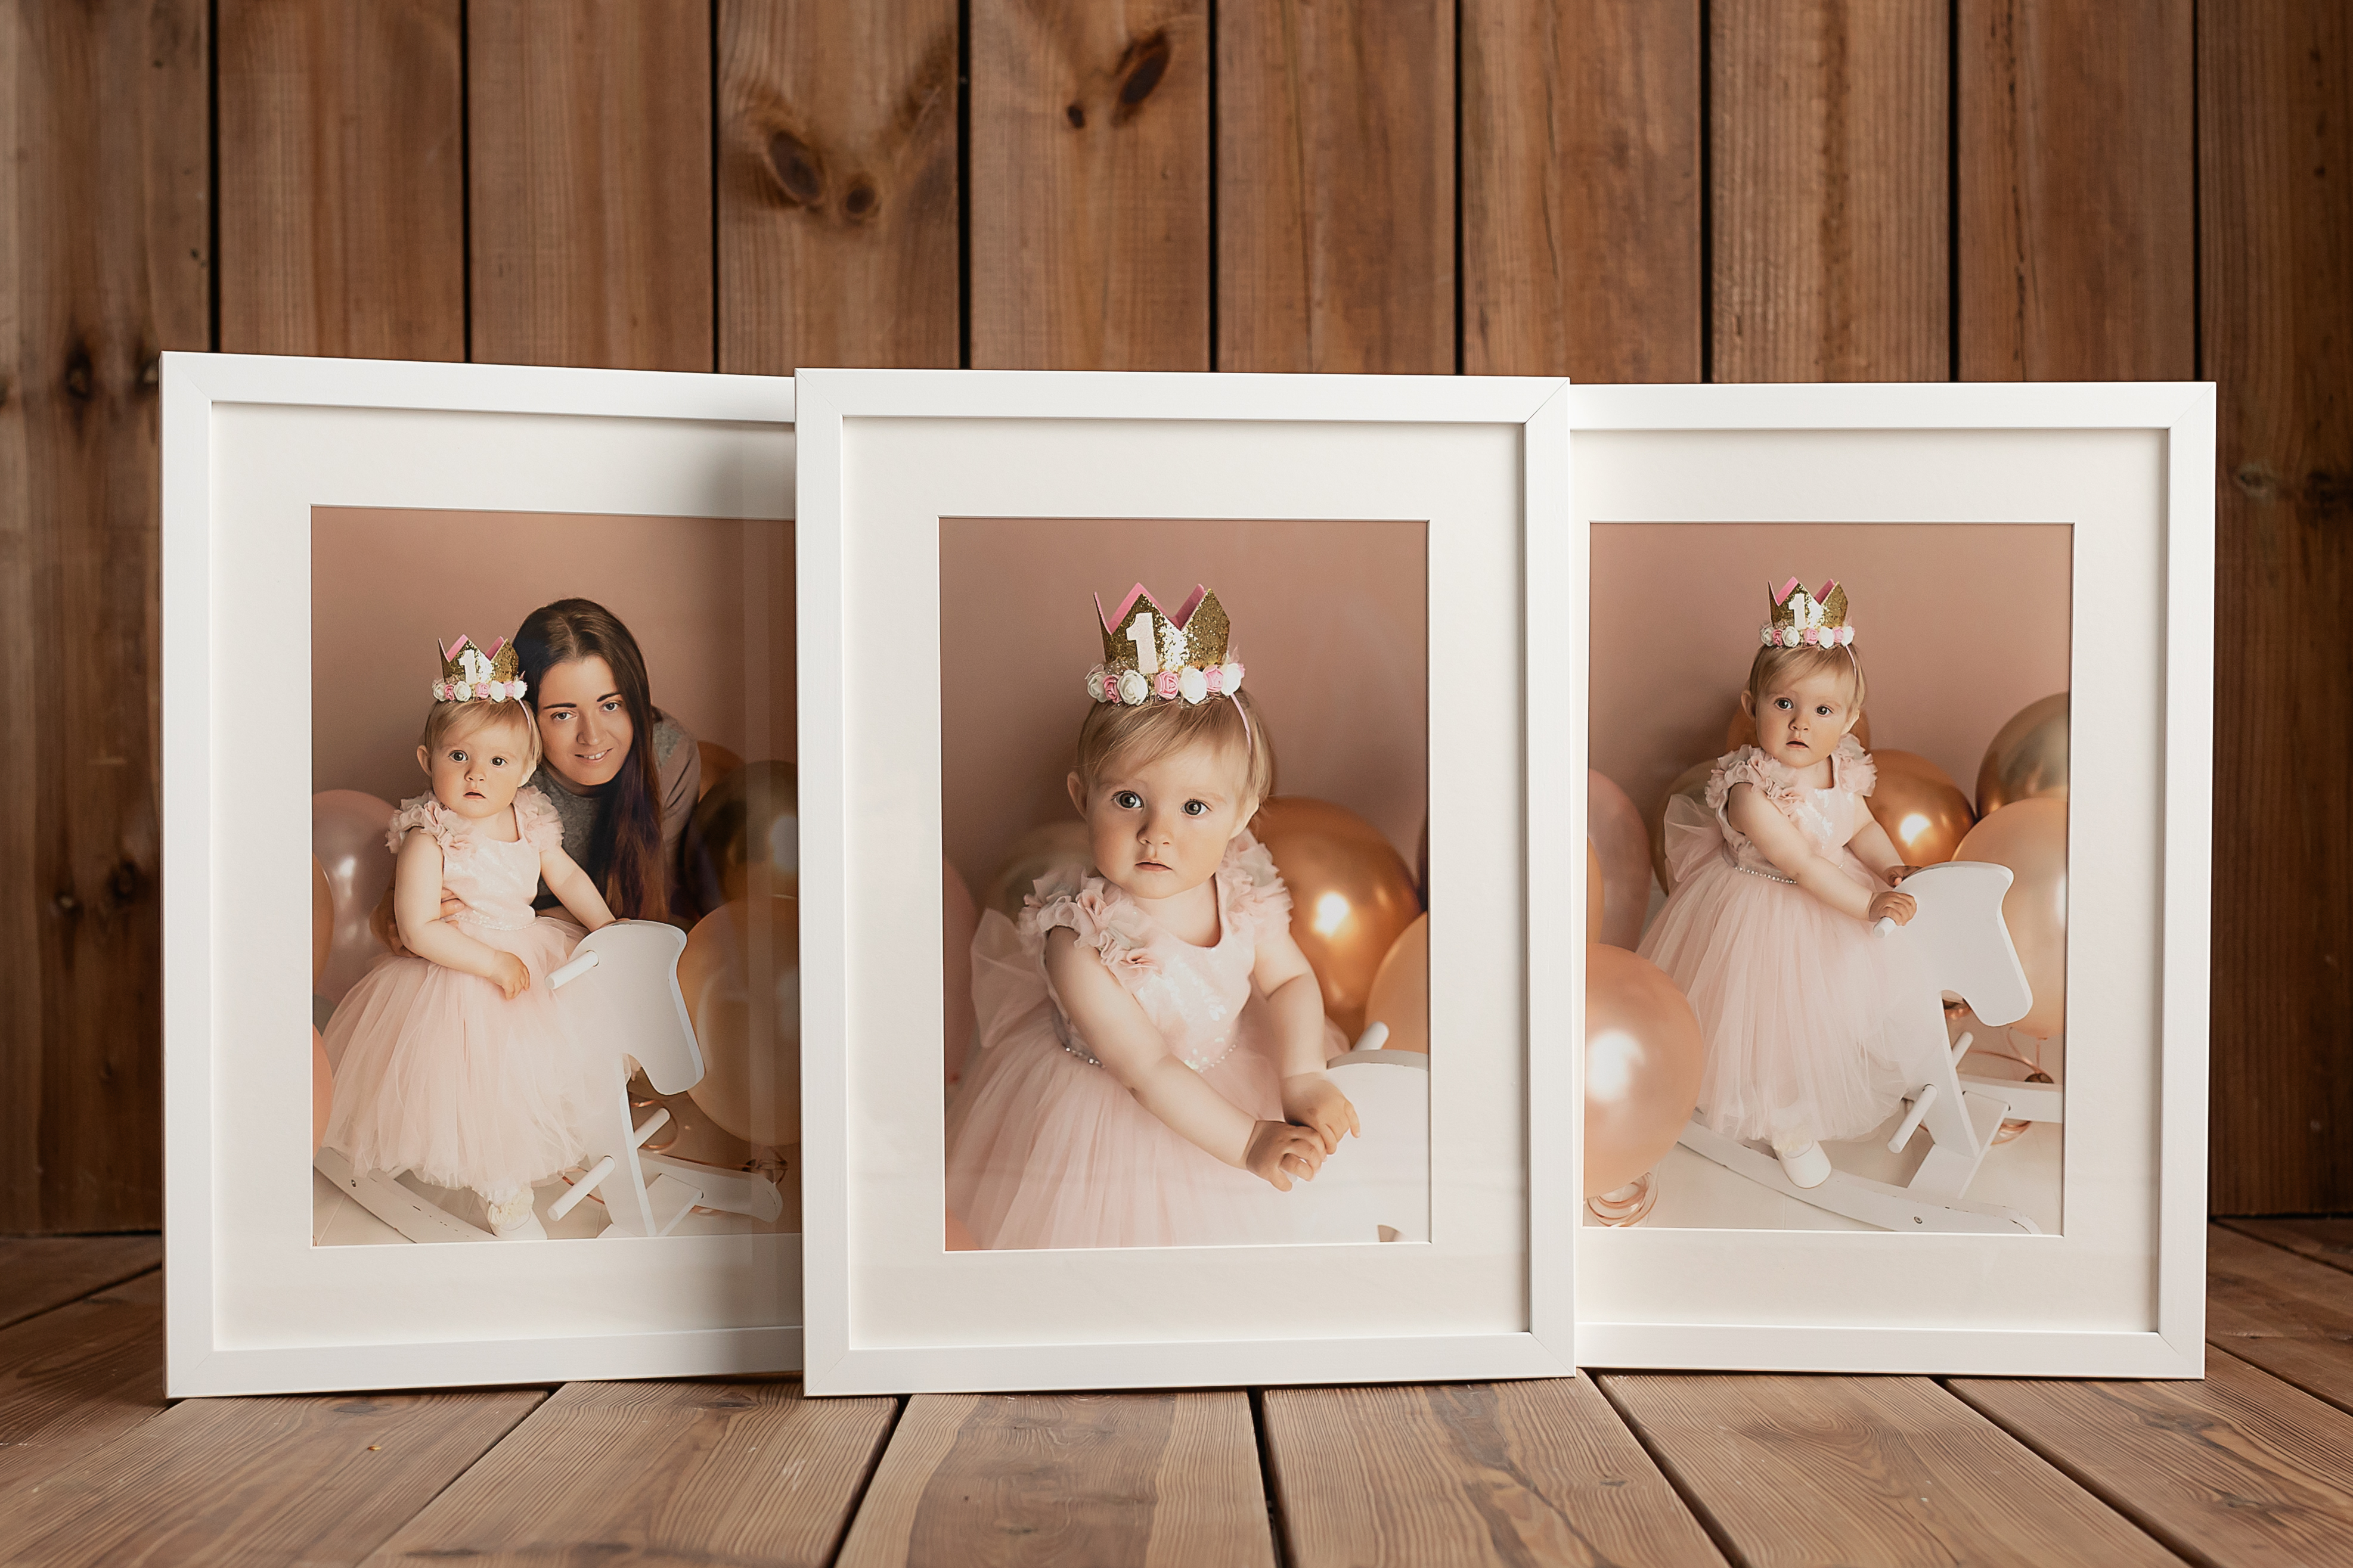 Framed pictures as a result of photo shoots